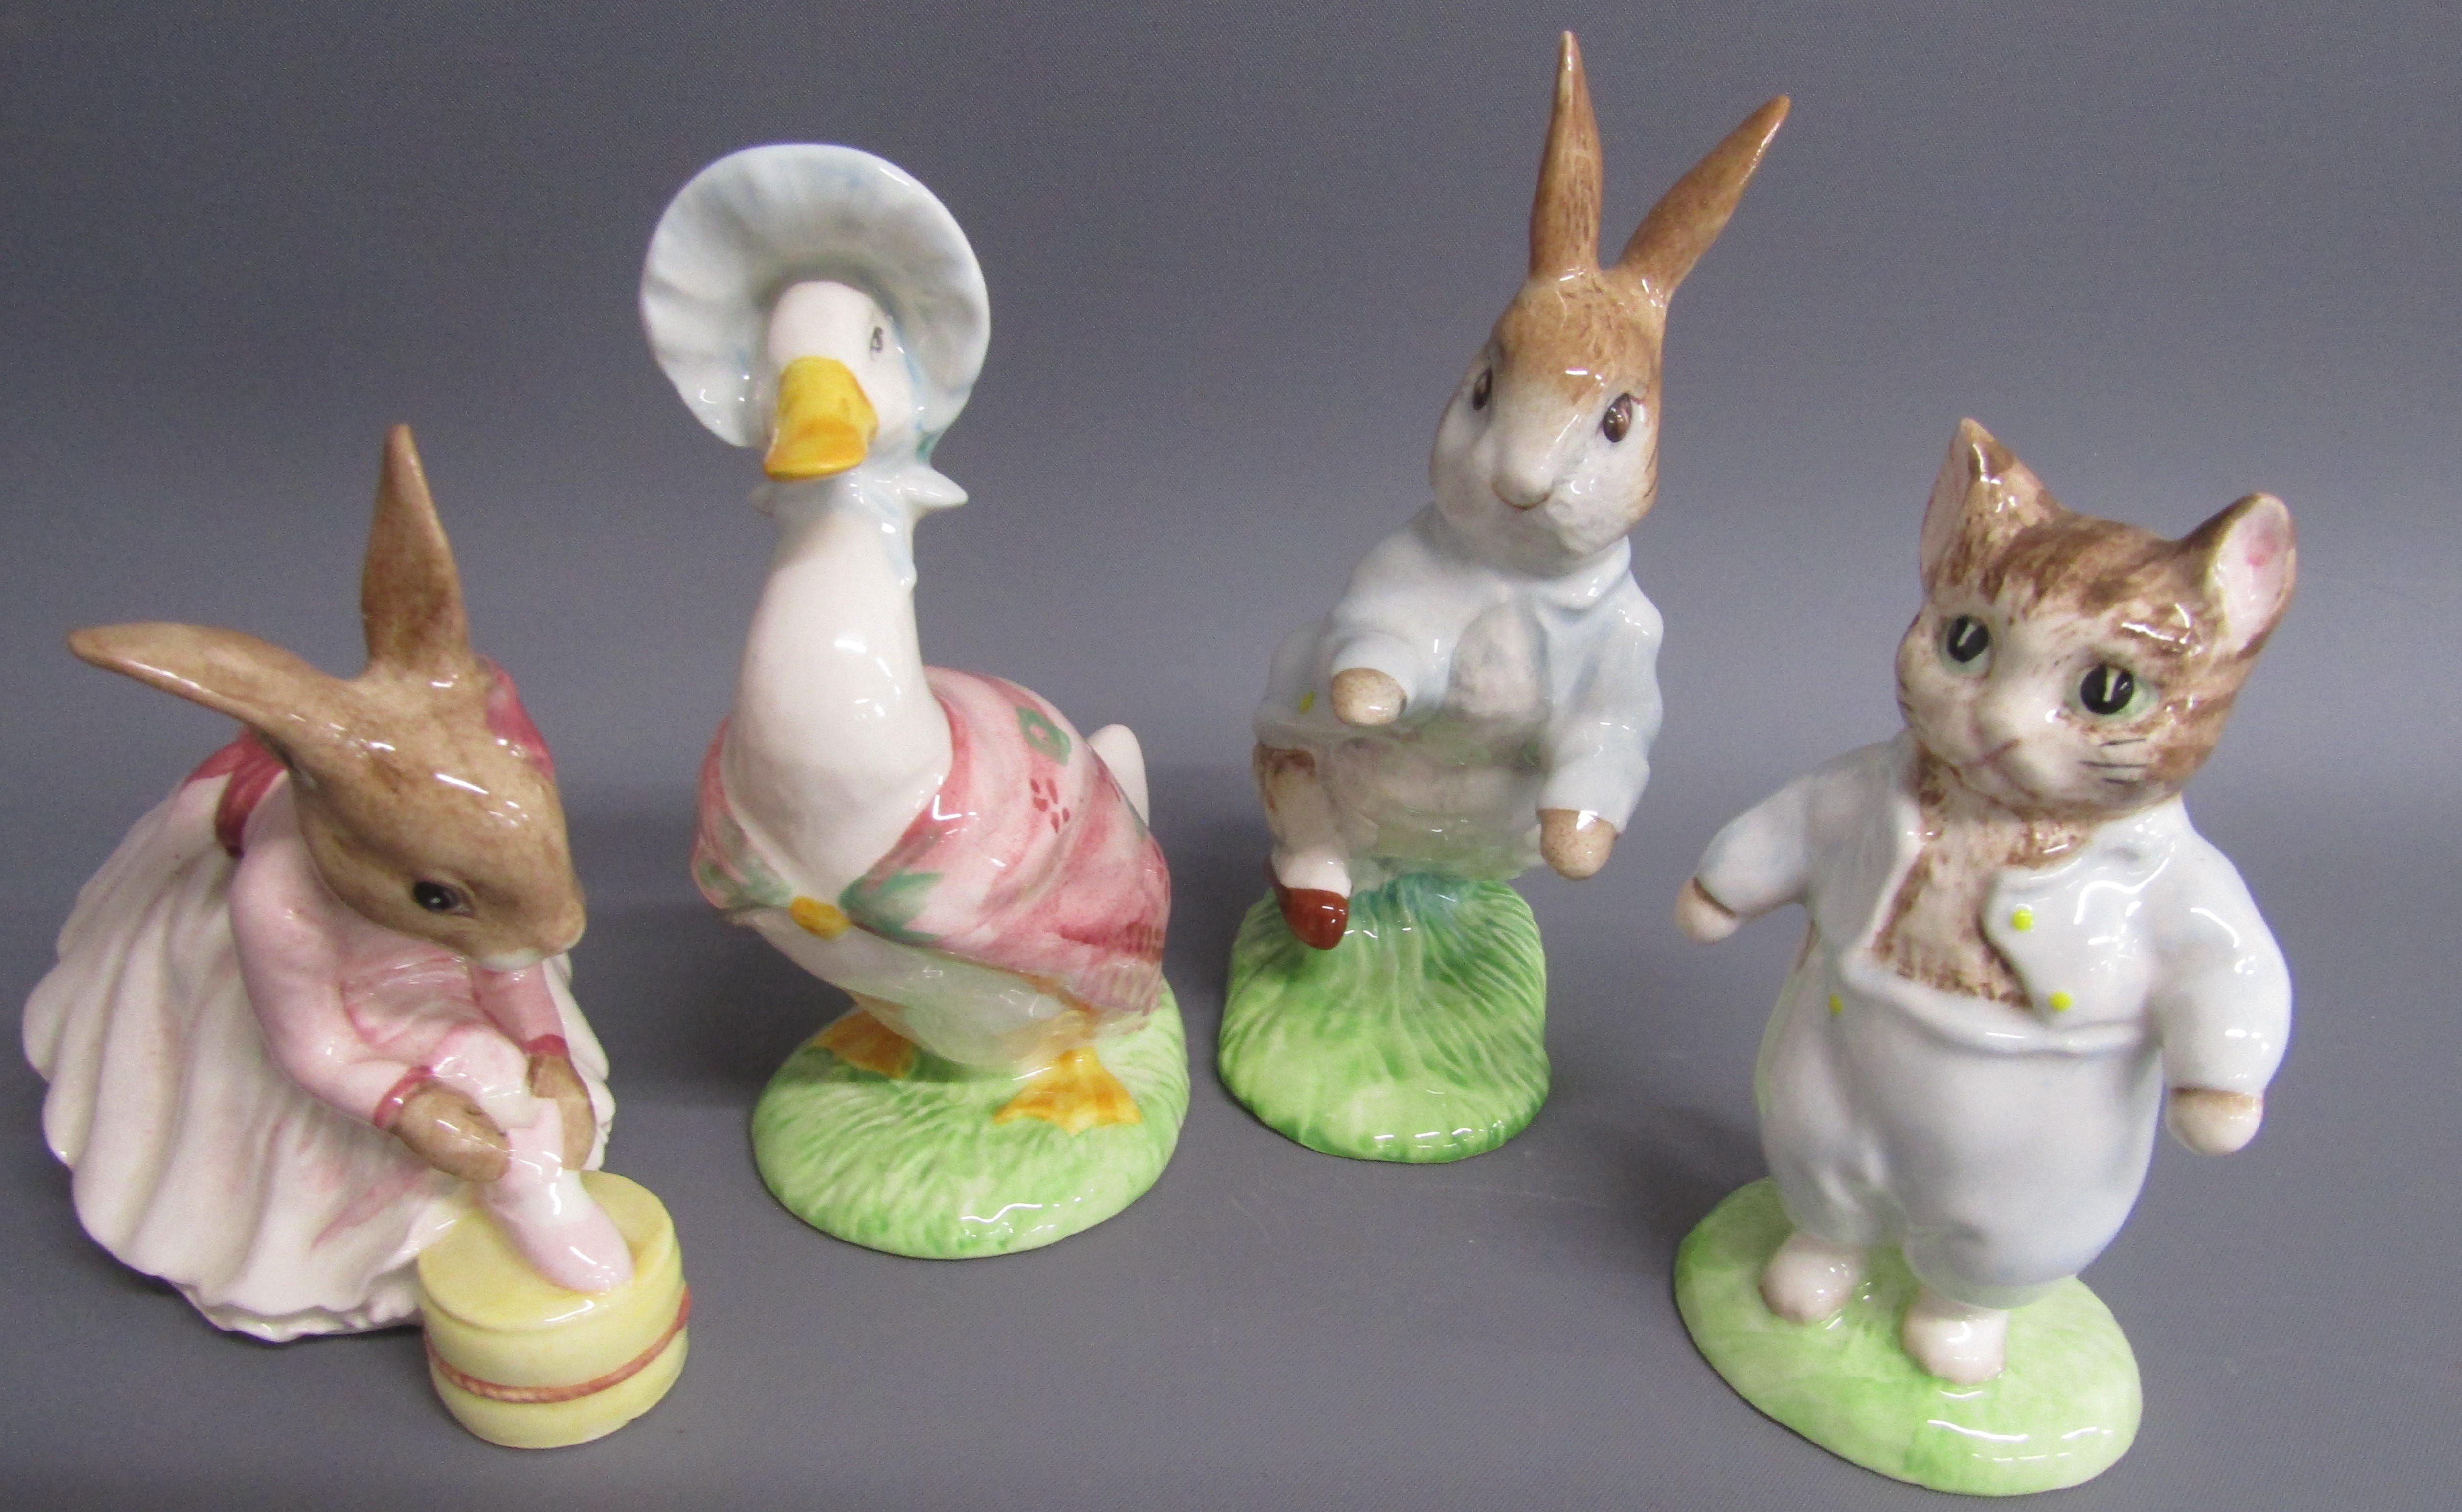 Royal Doulton Winnie the Pooh figures, 'The more it snows, tiddley pom' - 'The Windy Day' - Eeyore - Image 4 of 8